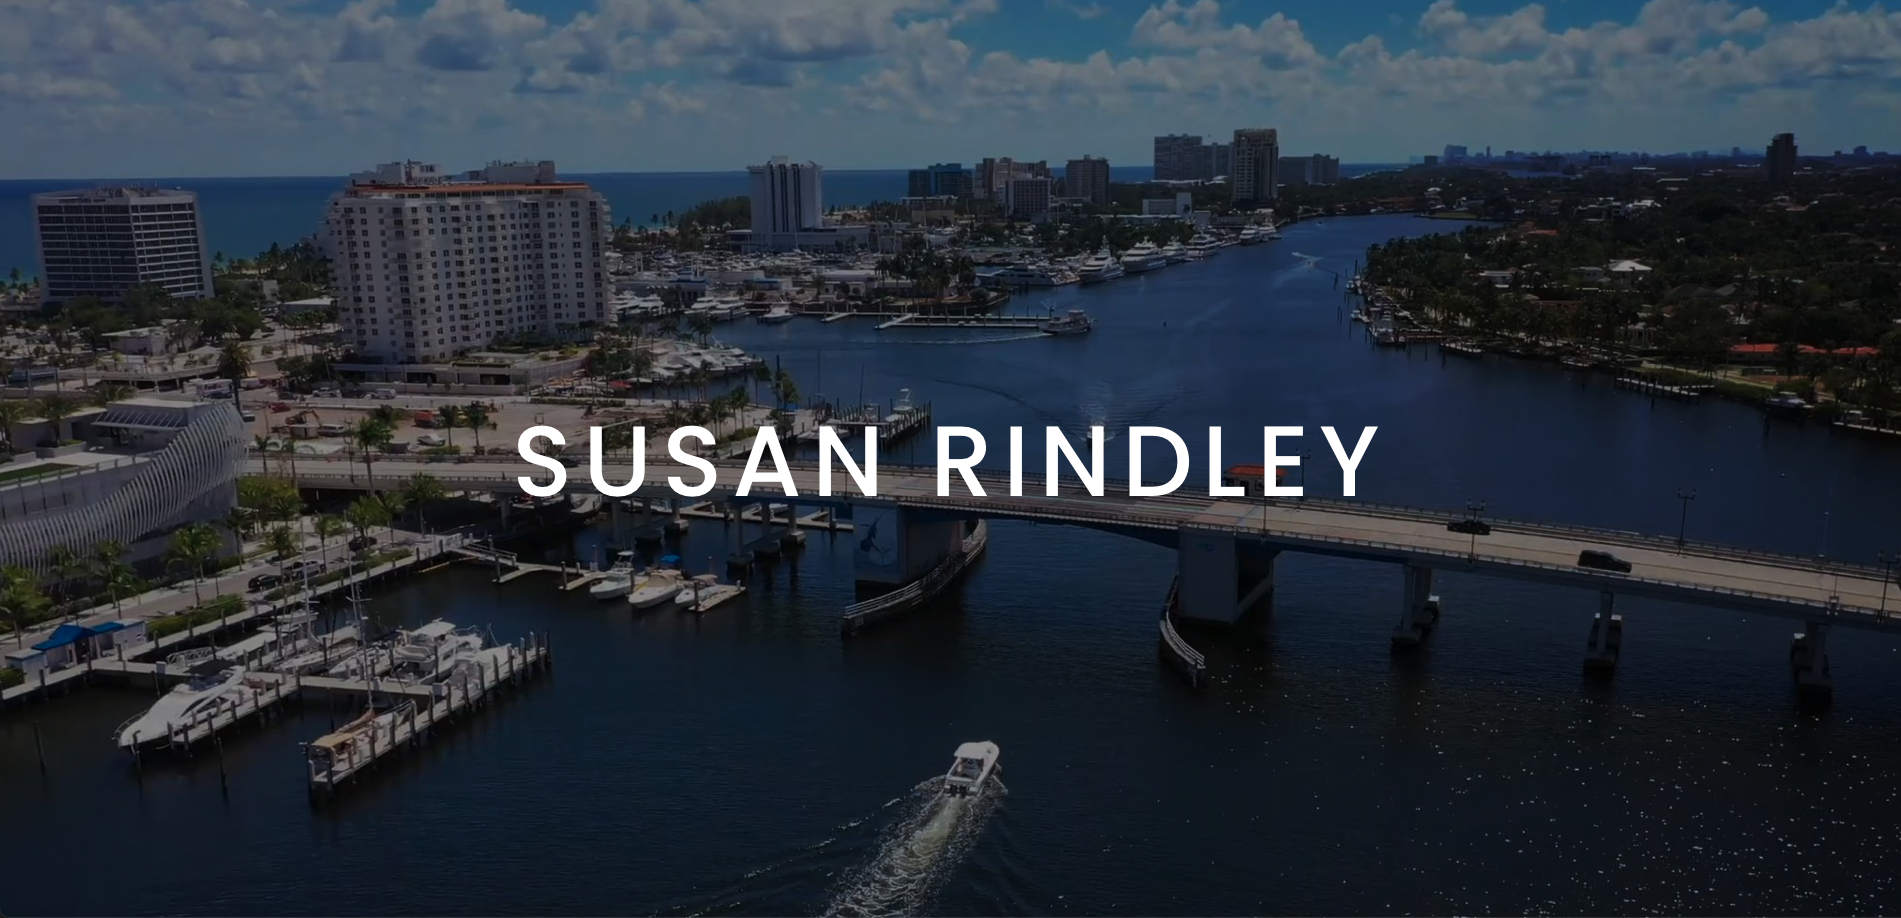 IU Susan Rindley Cover with white logo against a backdrop of boat cruising in a canal by a city towards a bridge with other boats docked in a harbor nearby